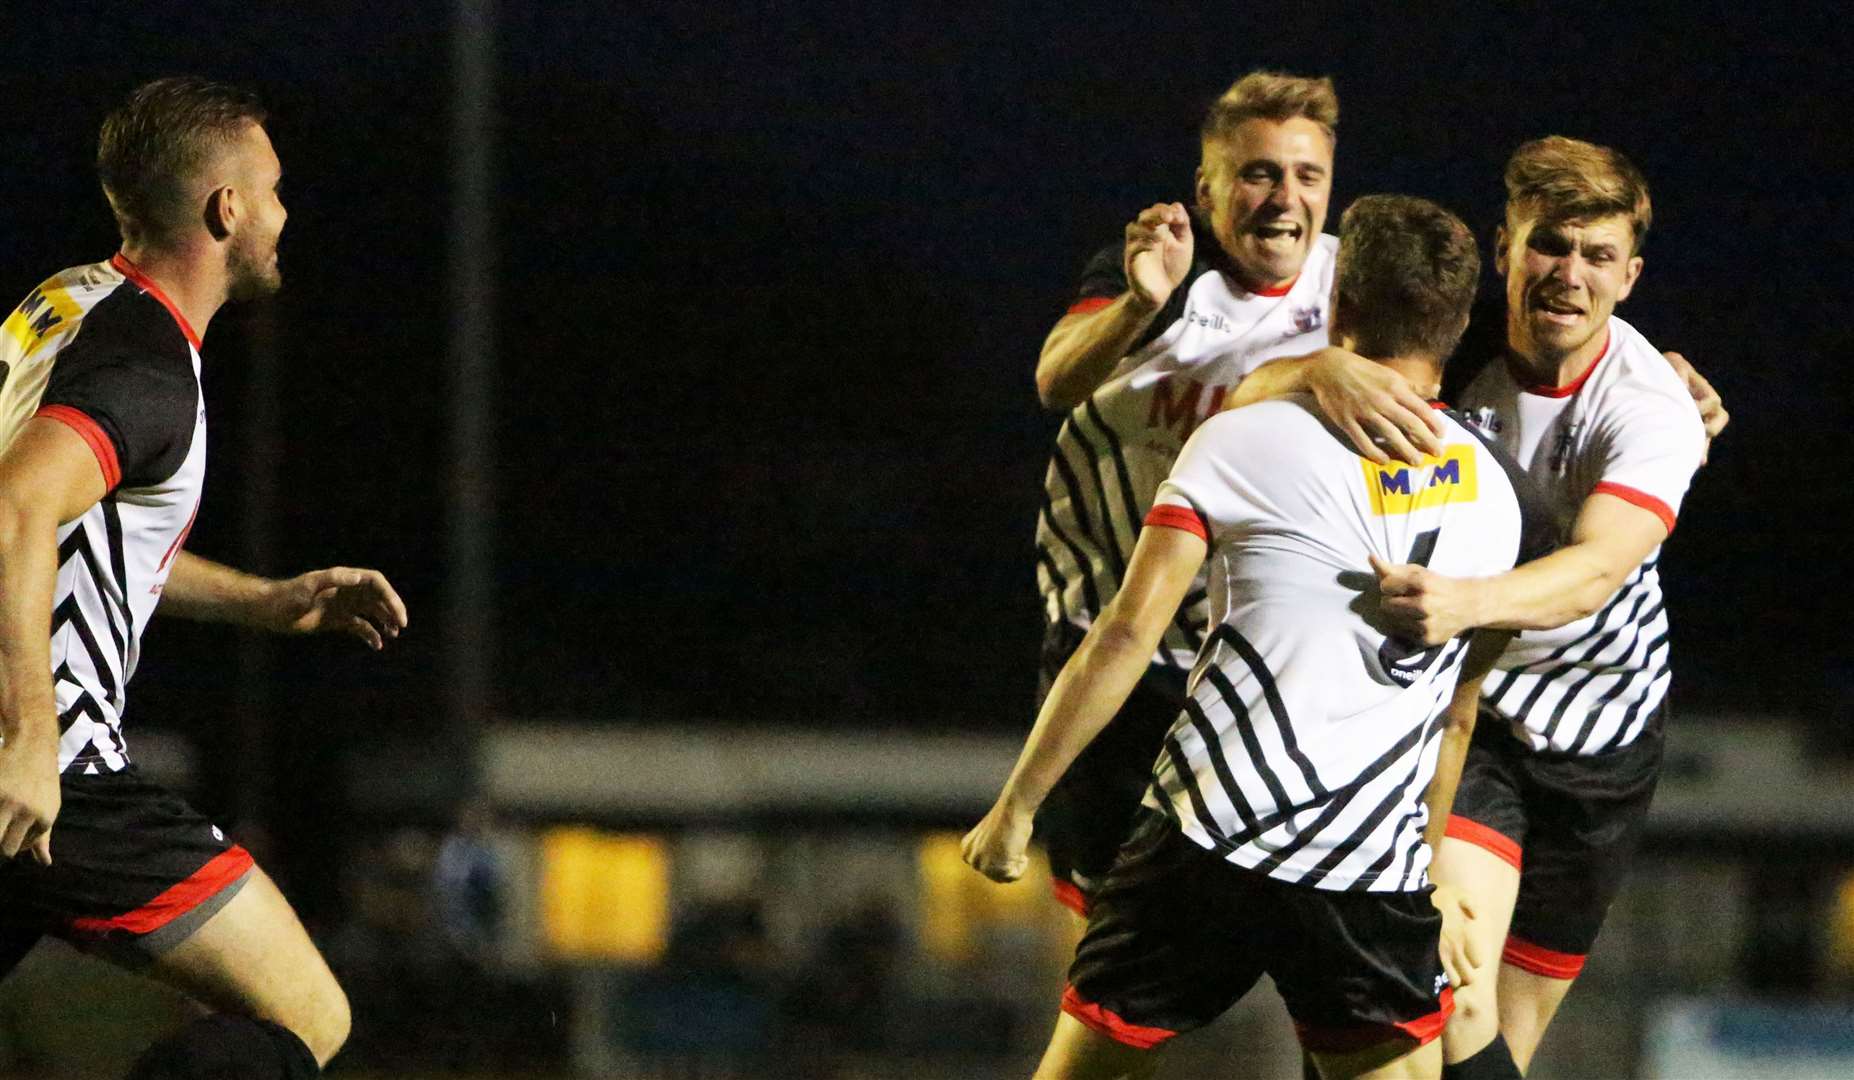 Deal celebrate after Billy Munday opens the scoring in the second minute of last Tuesday’s 3-0 win at home to Whitstable. Picture: Paul Willmott